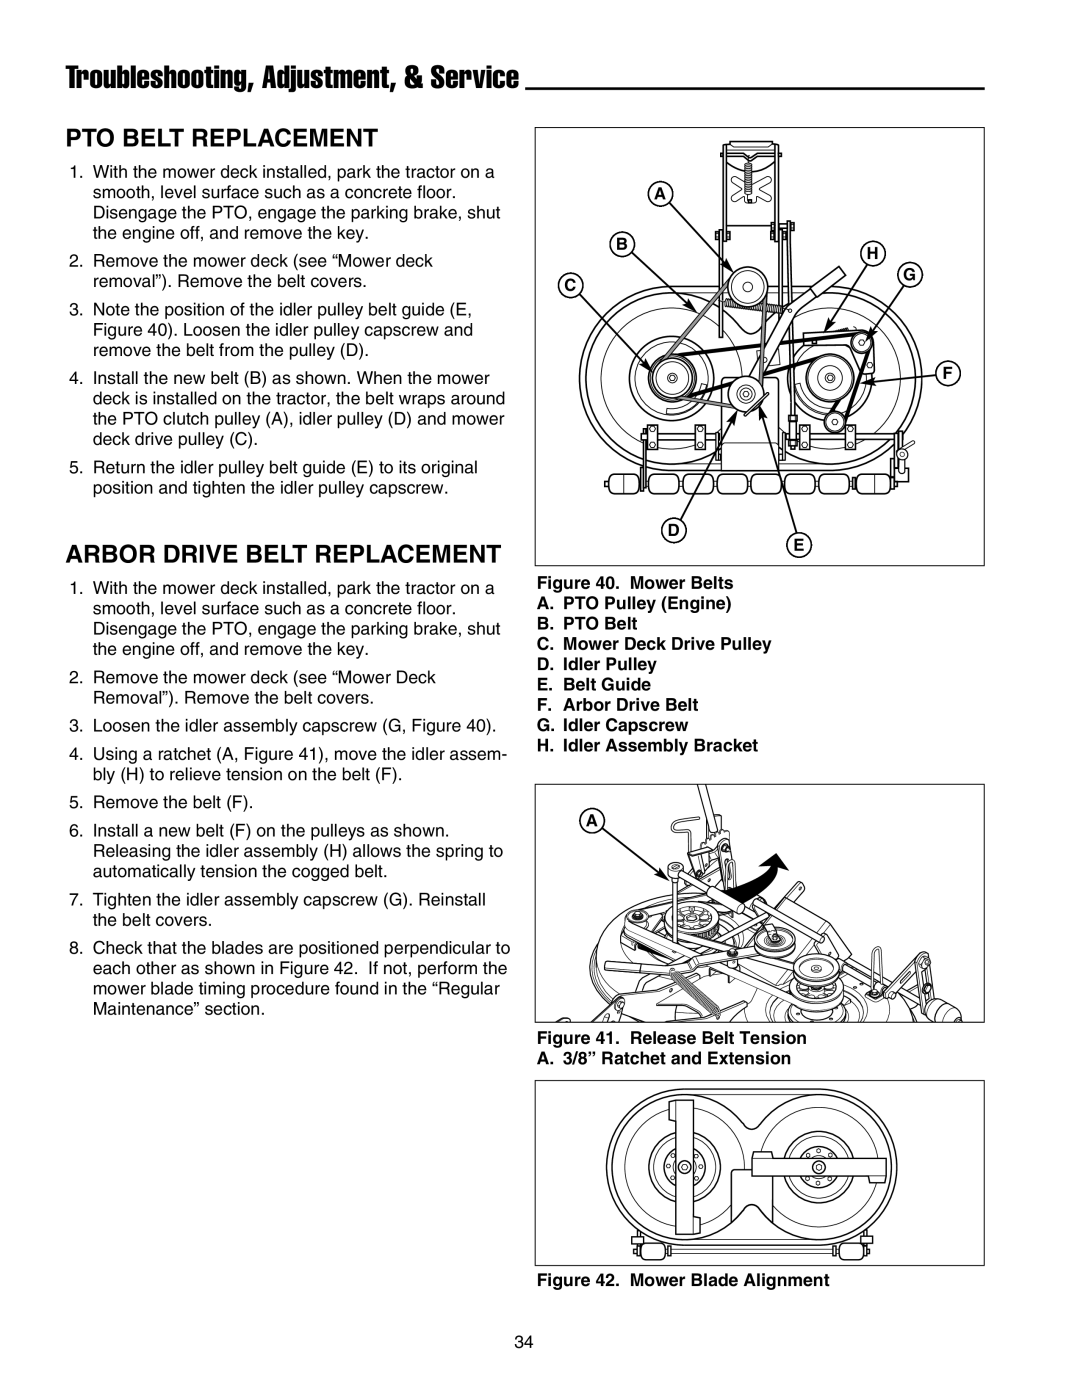 Snapper XL Series manual Pto Belt Replacement, Arbor Drive Belt Replacement, Troubleshooting, Adjustment, & Service 